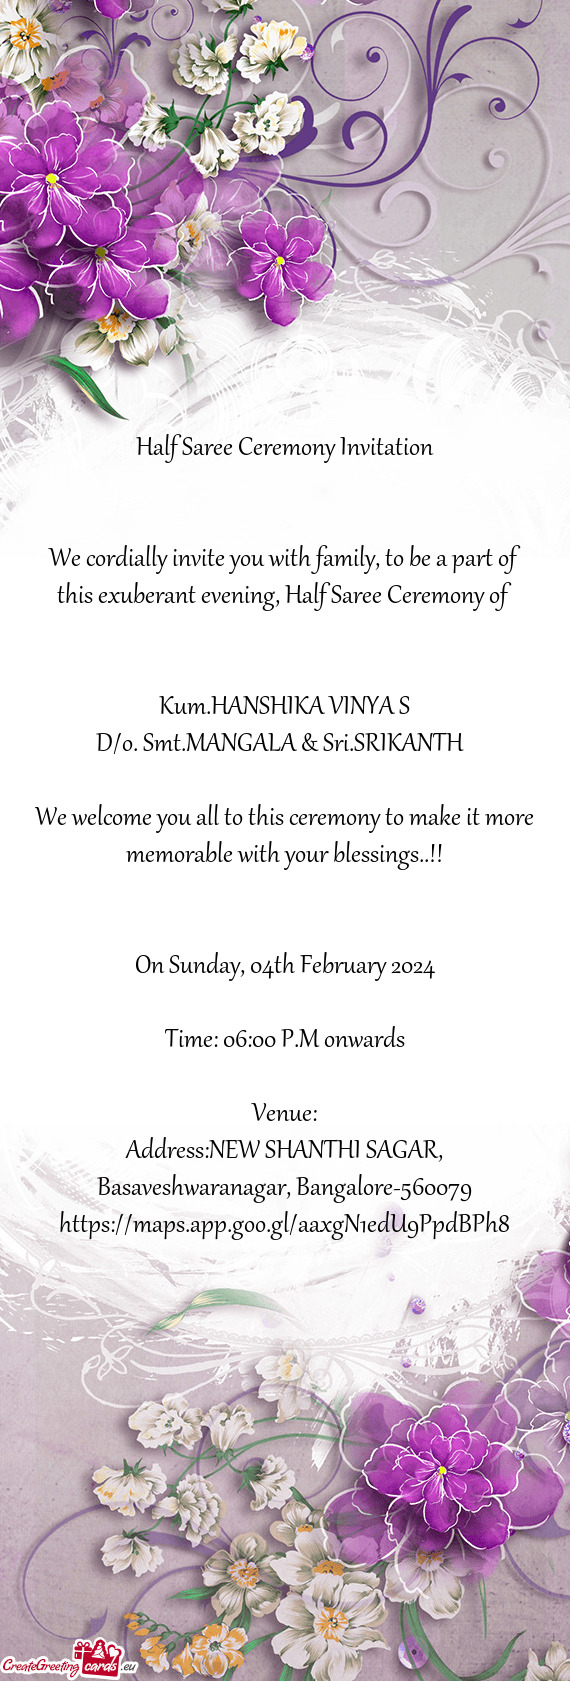 We cordially invite you with family, to be a part of this exuberant evening, Half Saree Ceremony of